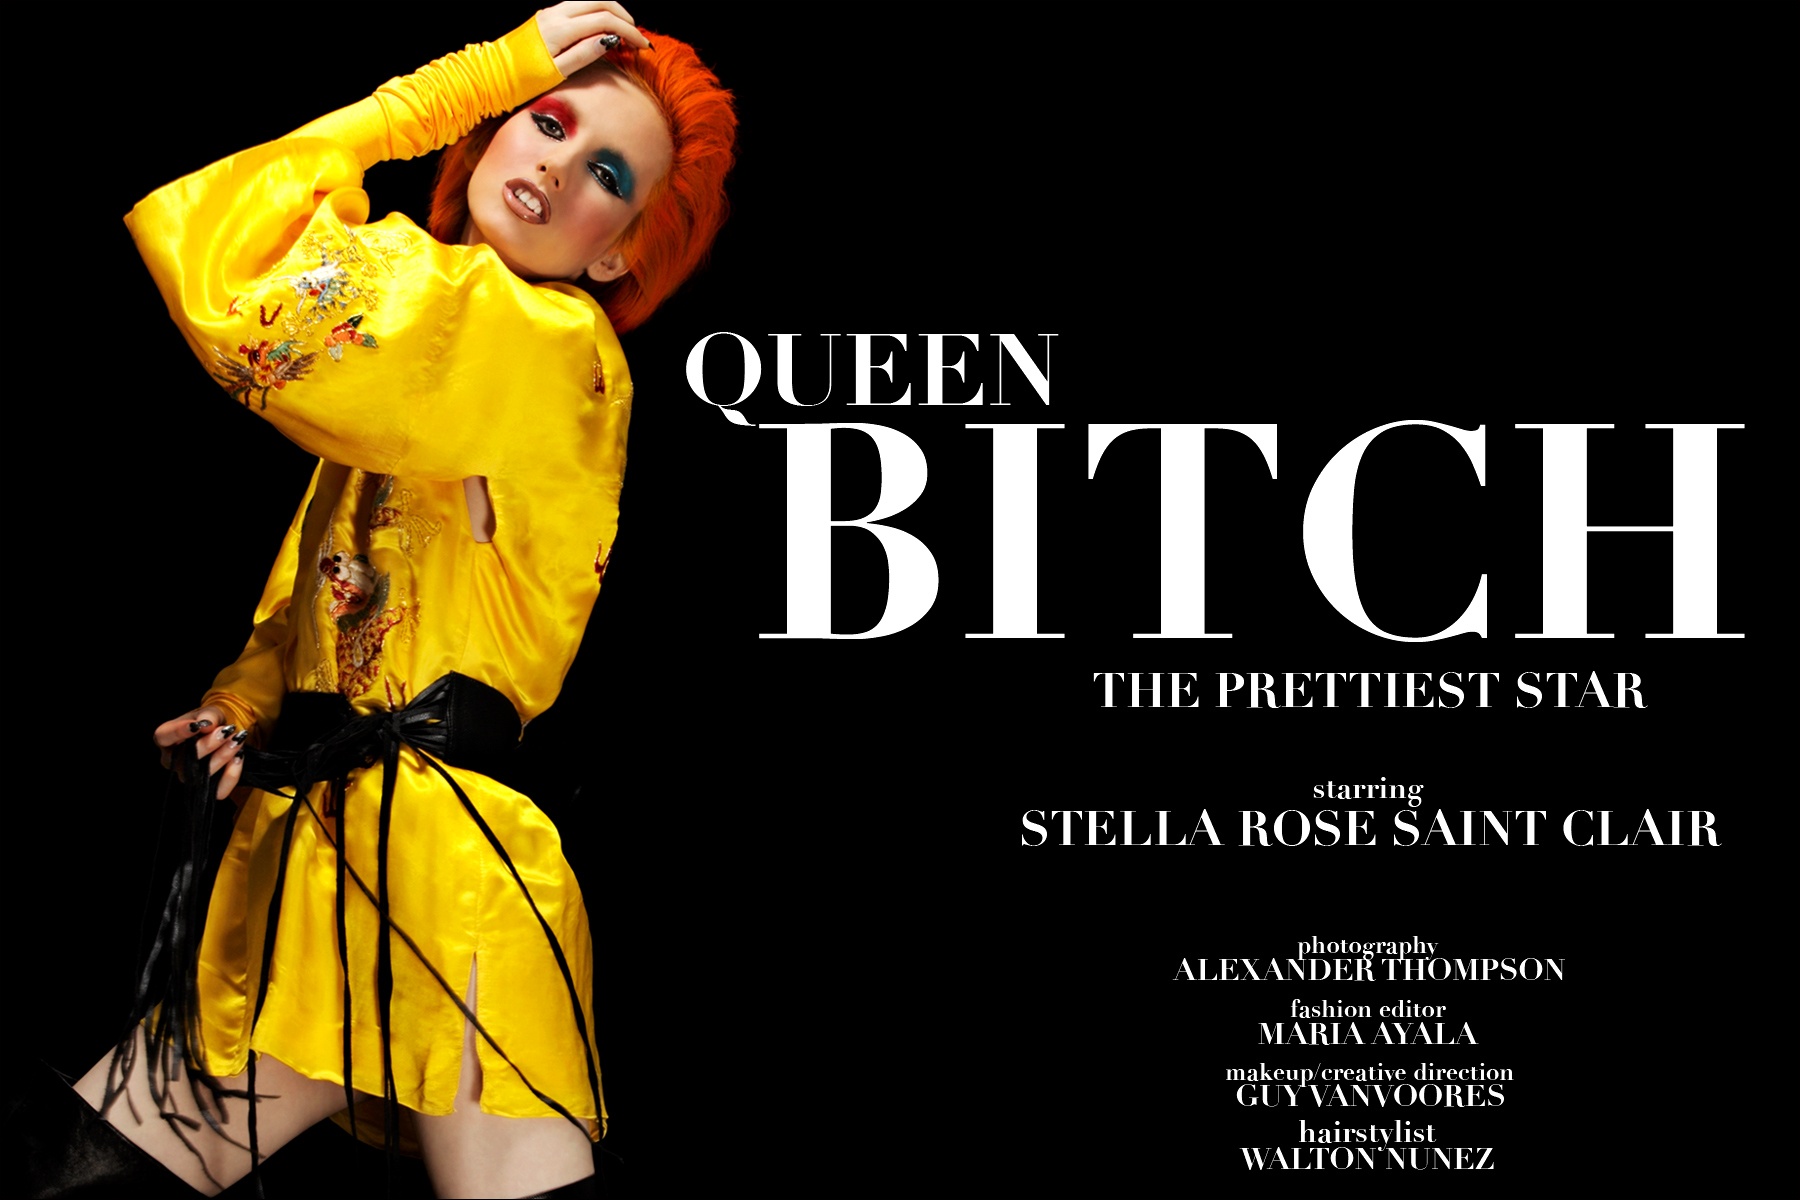 Stella Rose Saint Clair stars in Ponyboy Magazine's editorial "Queen Bitch", an homage to the glam/glitter rock style of Angela and David Bowie. Photographed in New York City by Alexander Thompson.